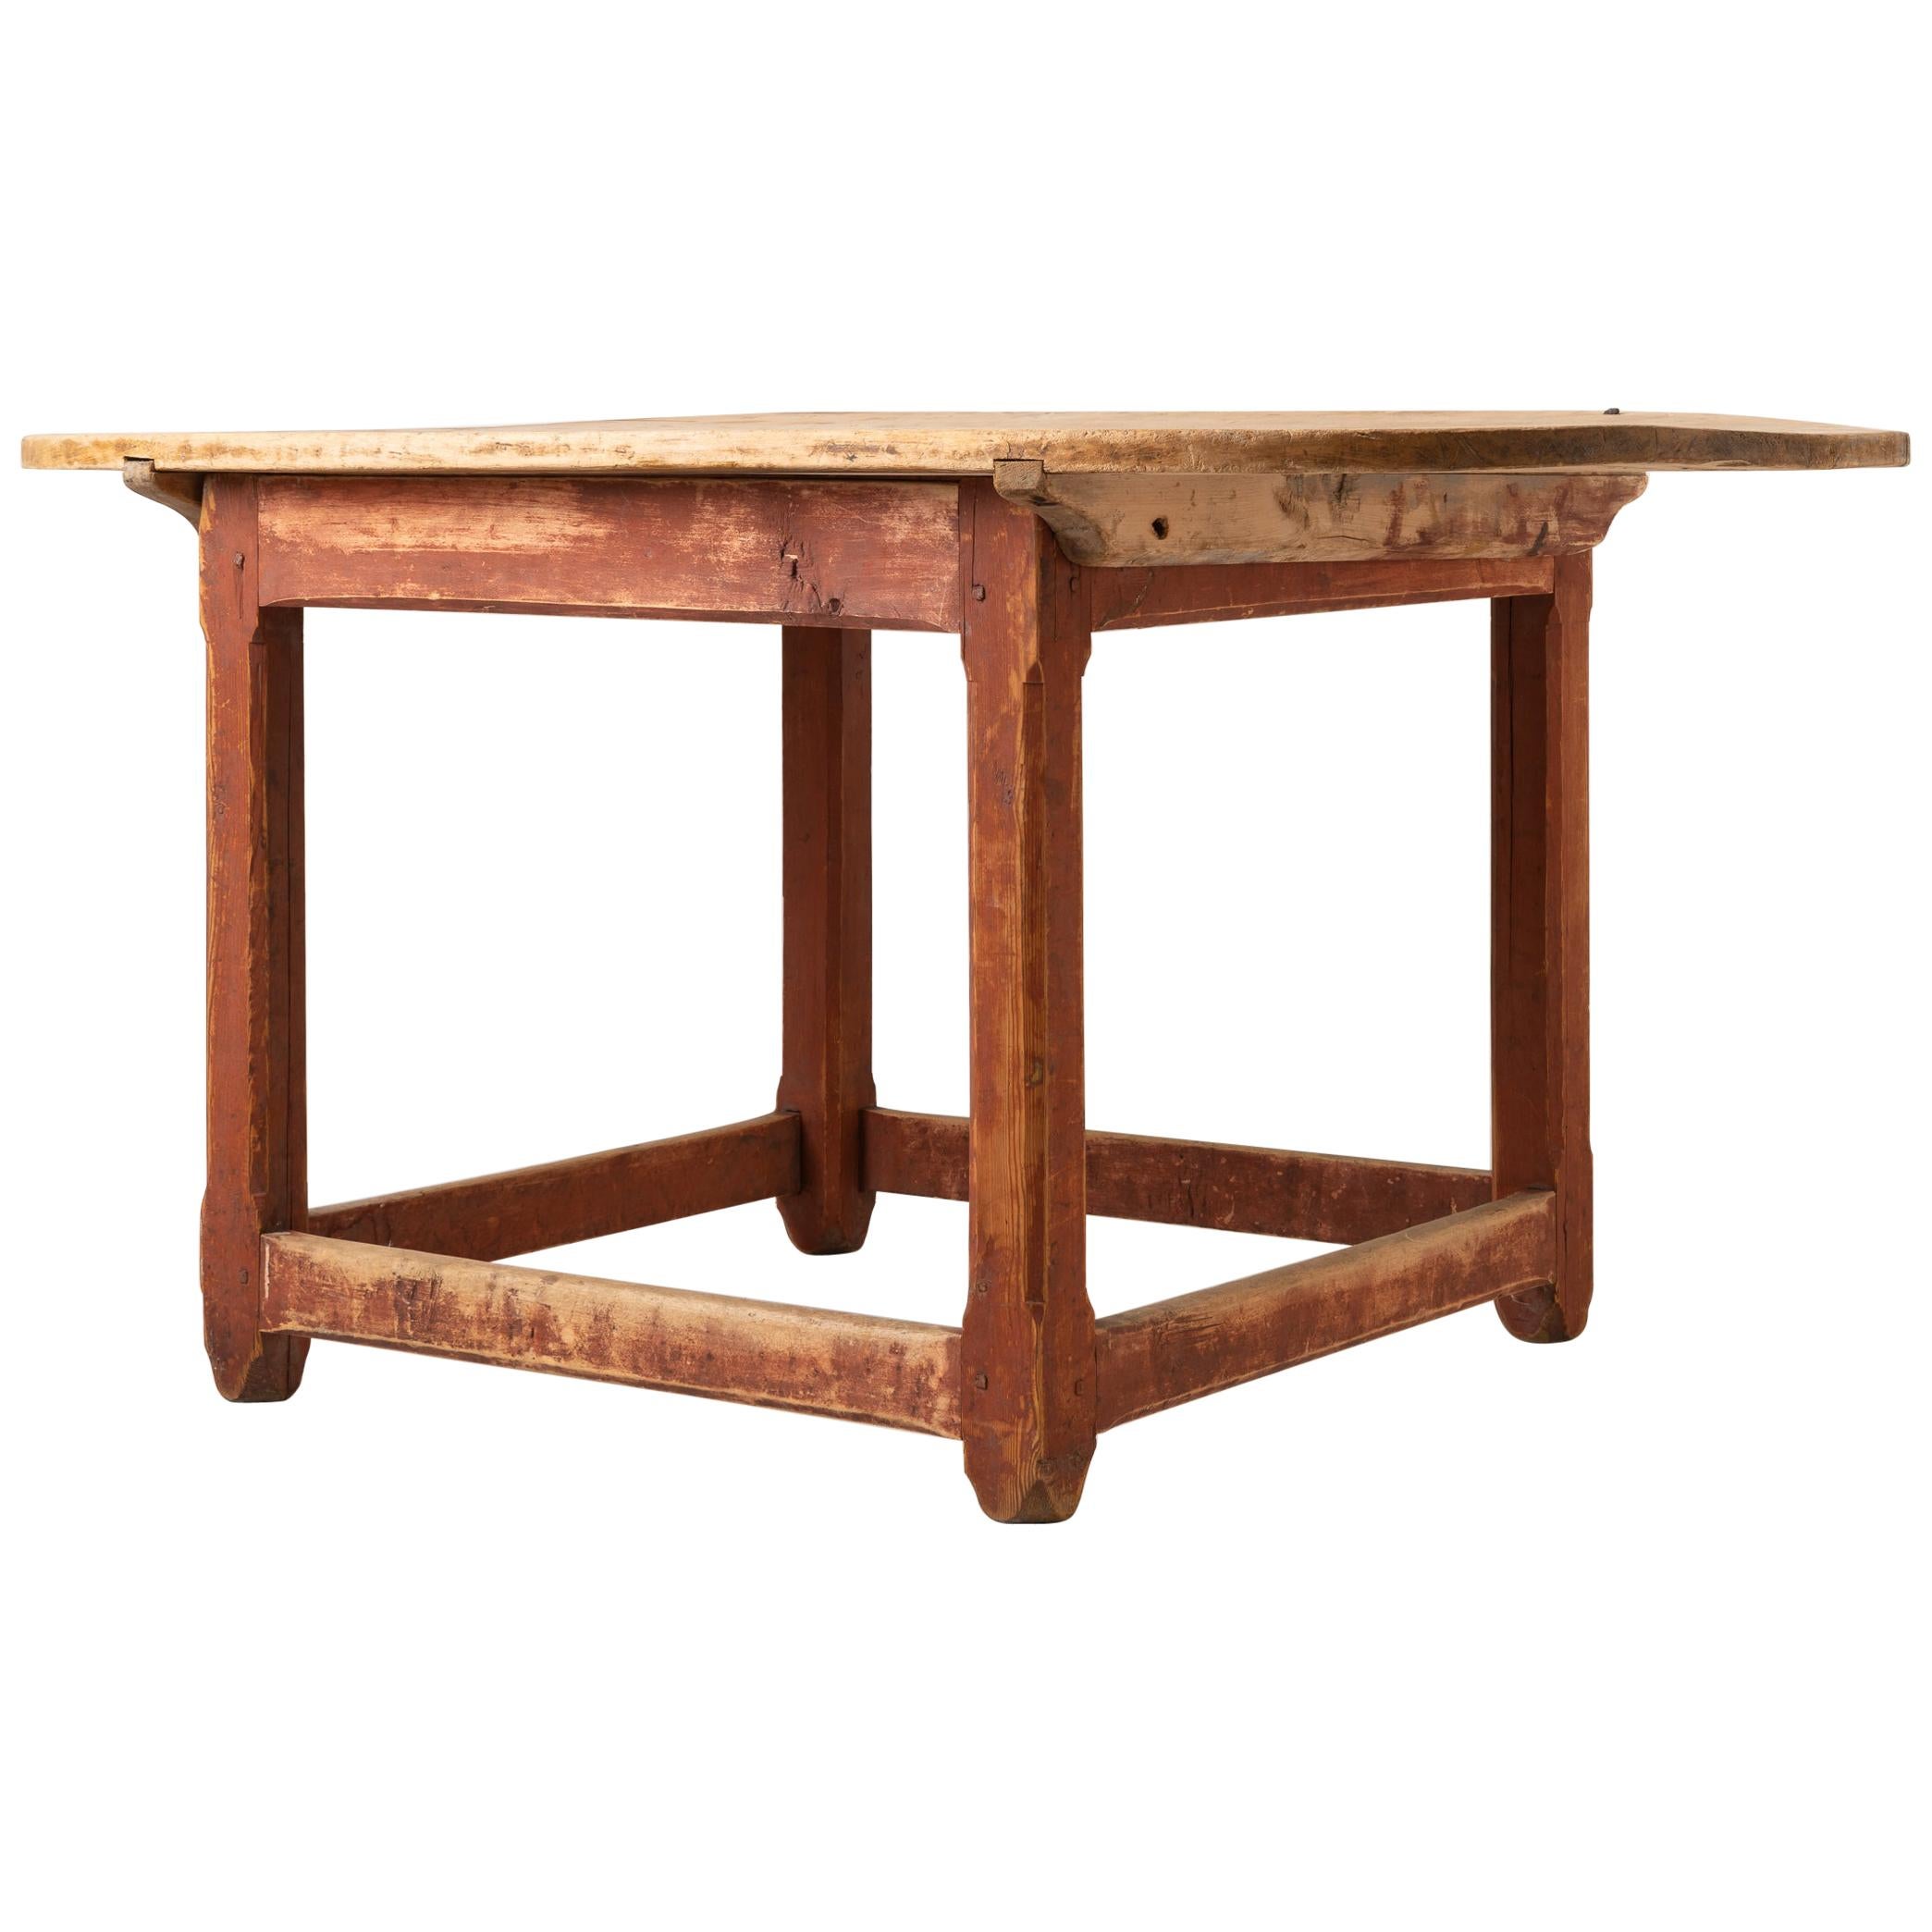 Late 1700s Swedish Rustic Baroque Centre Table For Sale